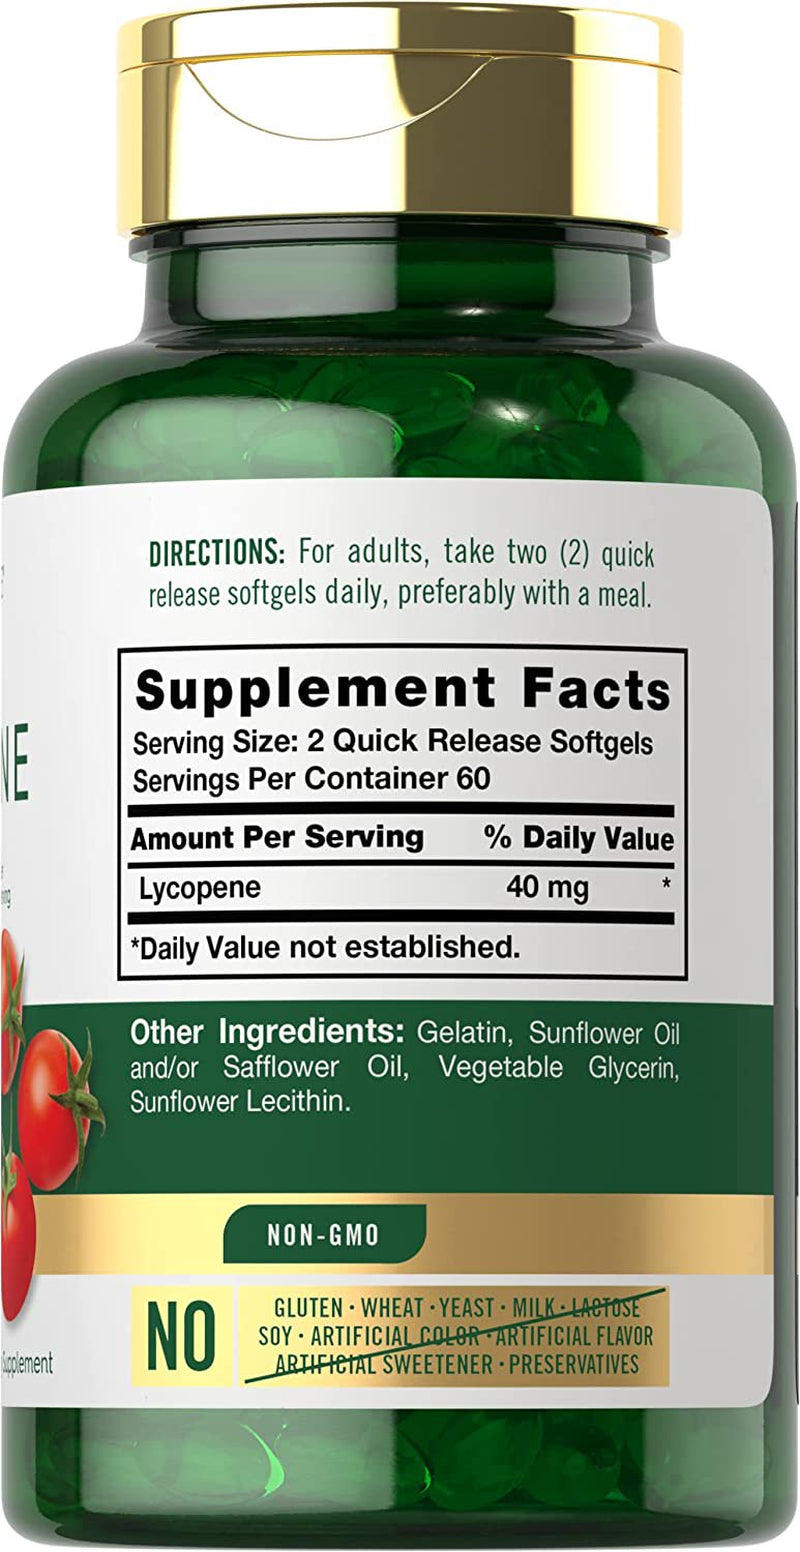 Lycopene | 40Mg | 120 Softgels | by Carlyle